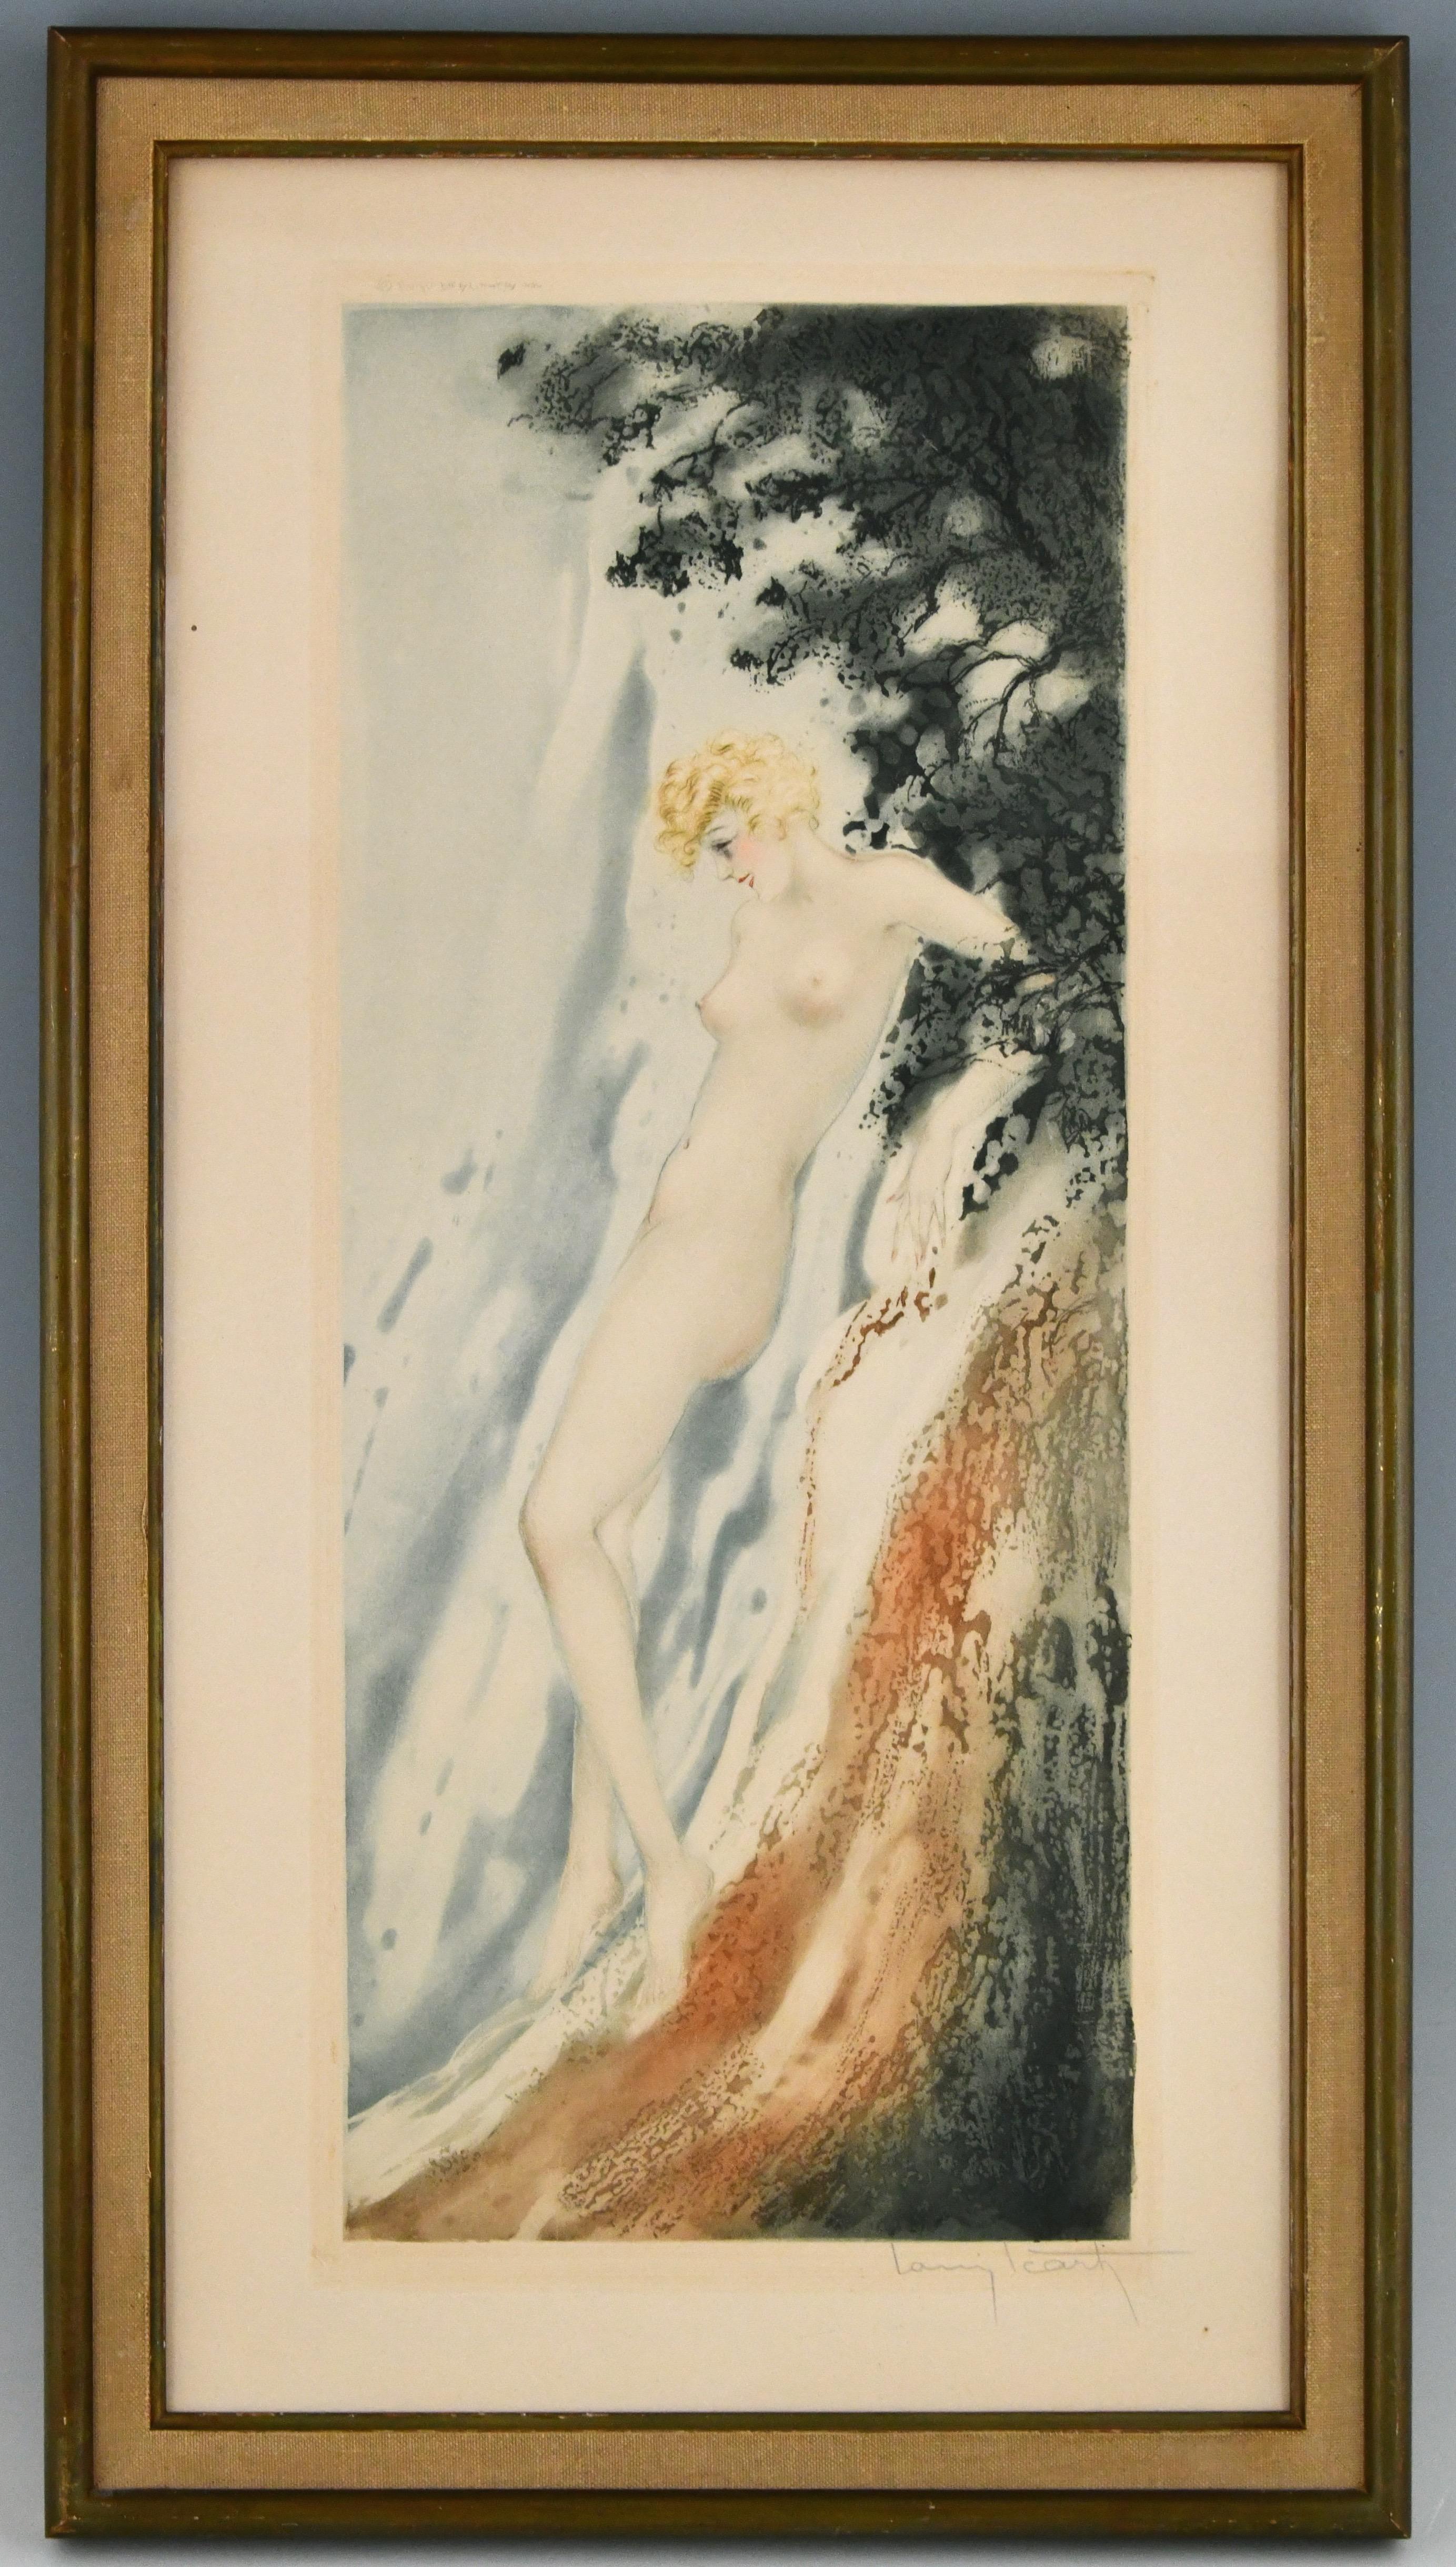 Pair of original Art Deco etchings with nudes in the waves.
One called La Source, the other Le jet d'eau.
Signed by Louis Icart (1888-1950) with windmill blindstamp, dated 1936.
Etching, drypoint and aquatint, printed with colour and hand